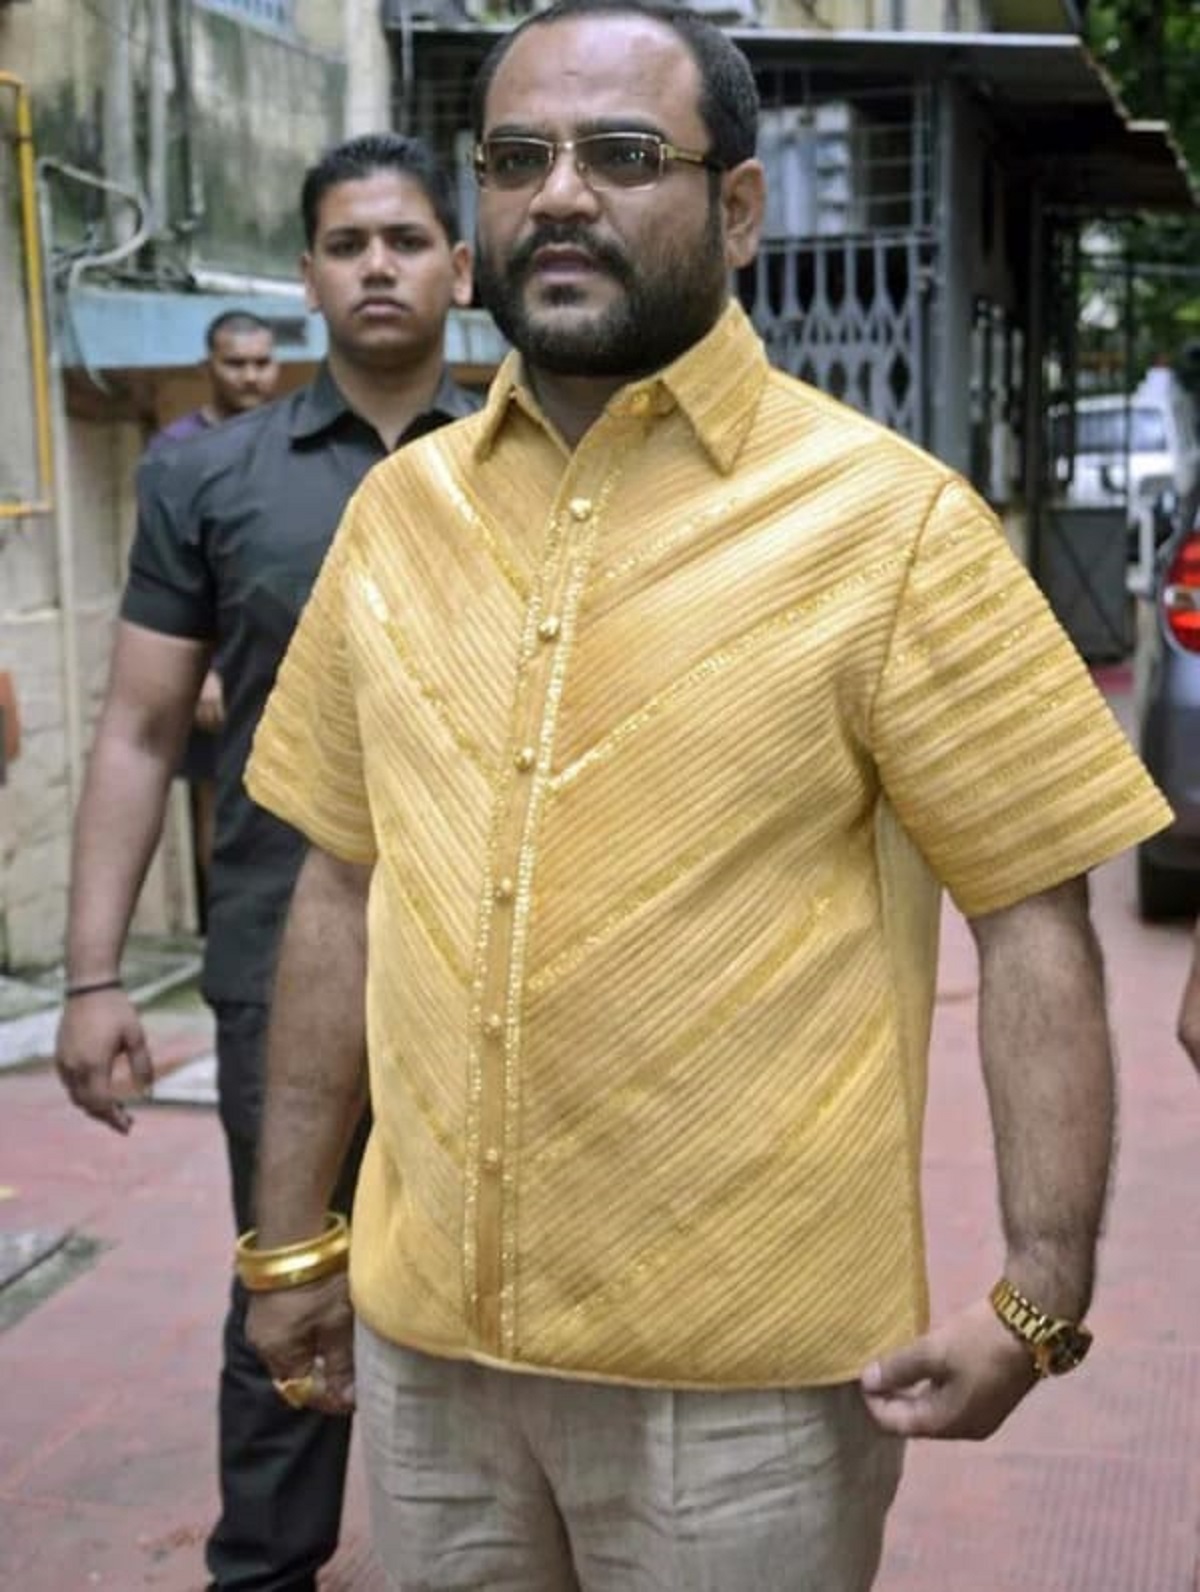 “Man wearing 4 kilos of gold shirt costing over $200,000”